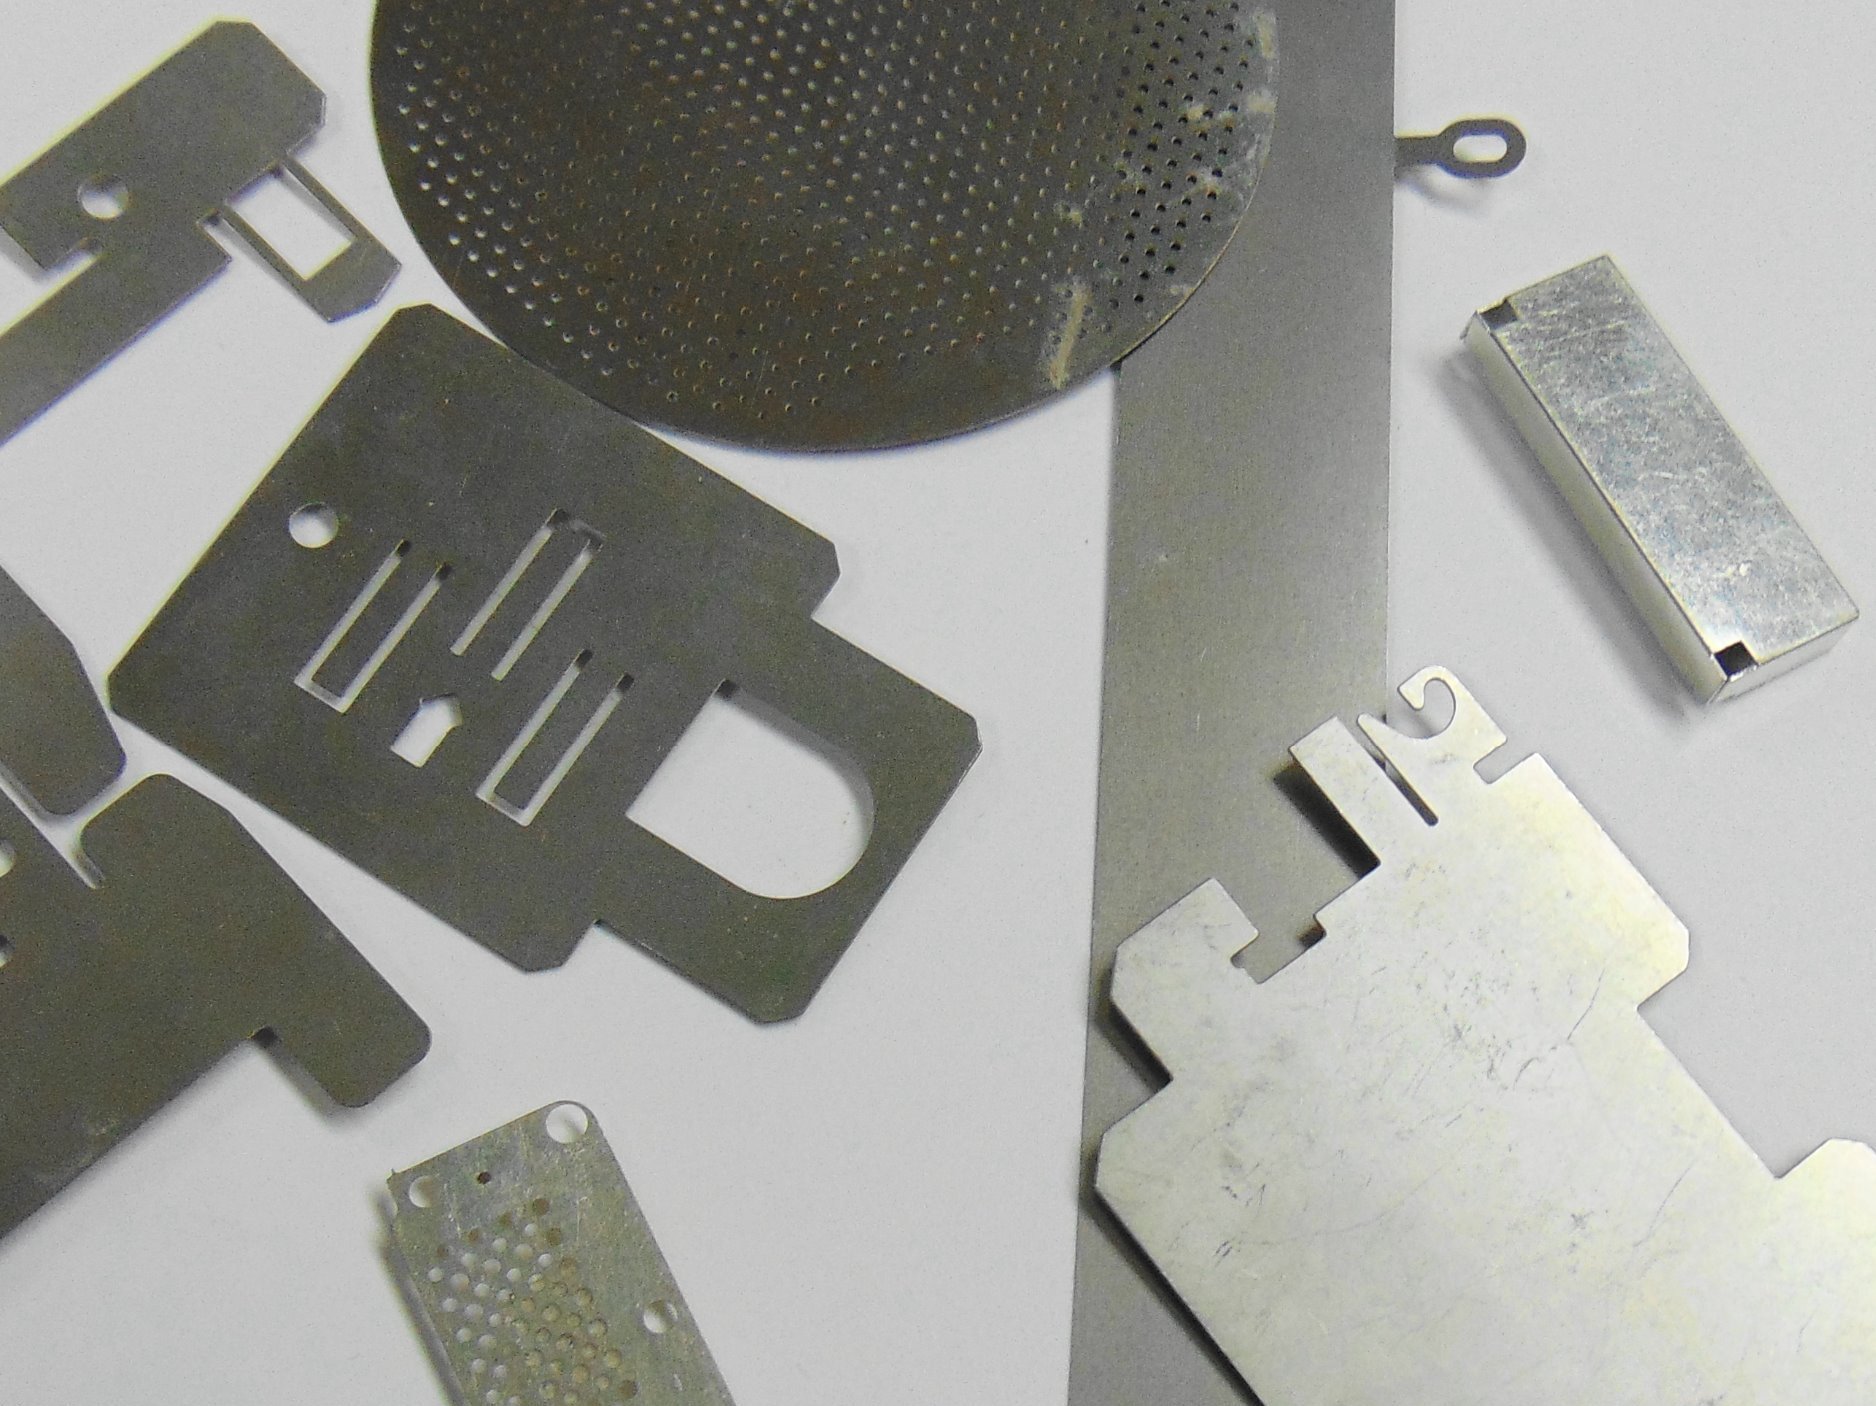 more etched Aluminium components manufactured by chemical milling.